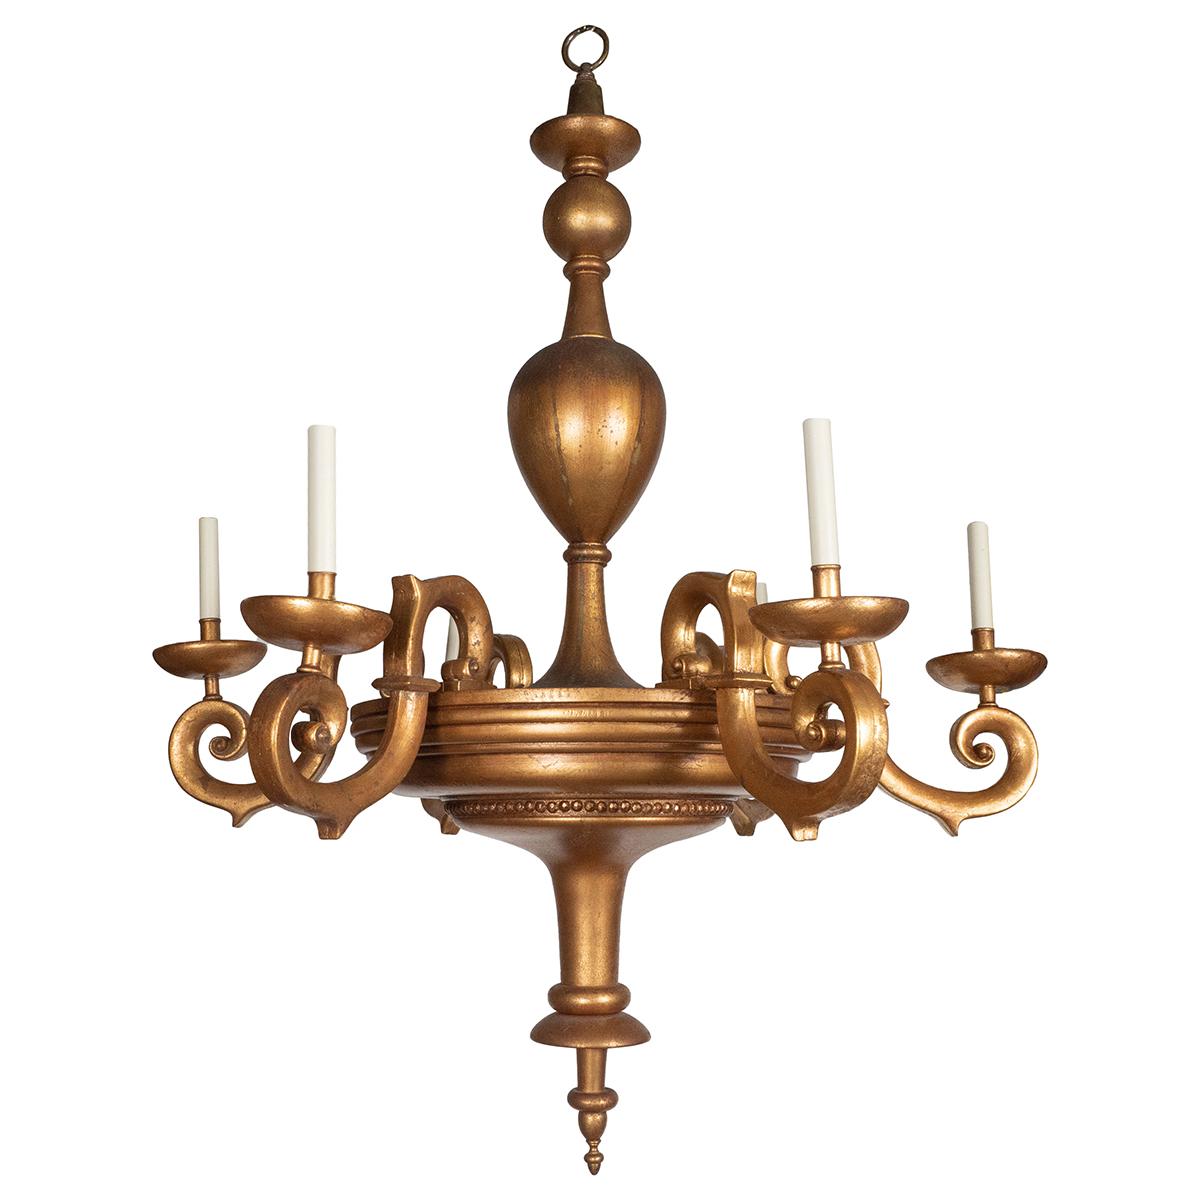 Six-arm gilt and turned wood chandelier with curvilinear tendril arms.